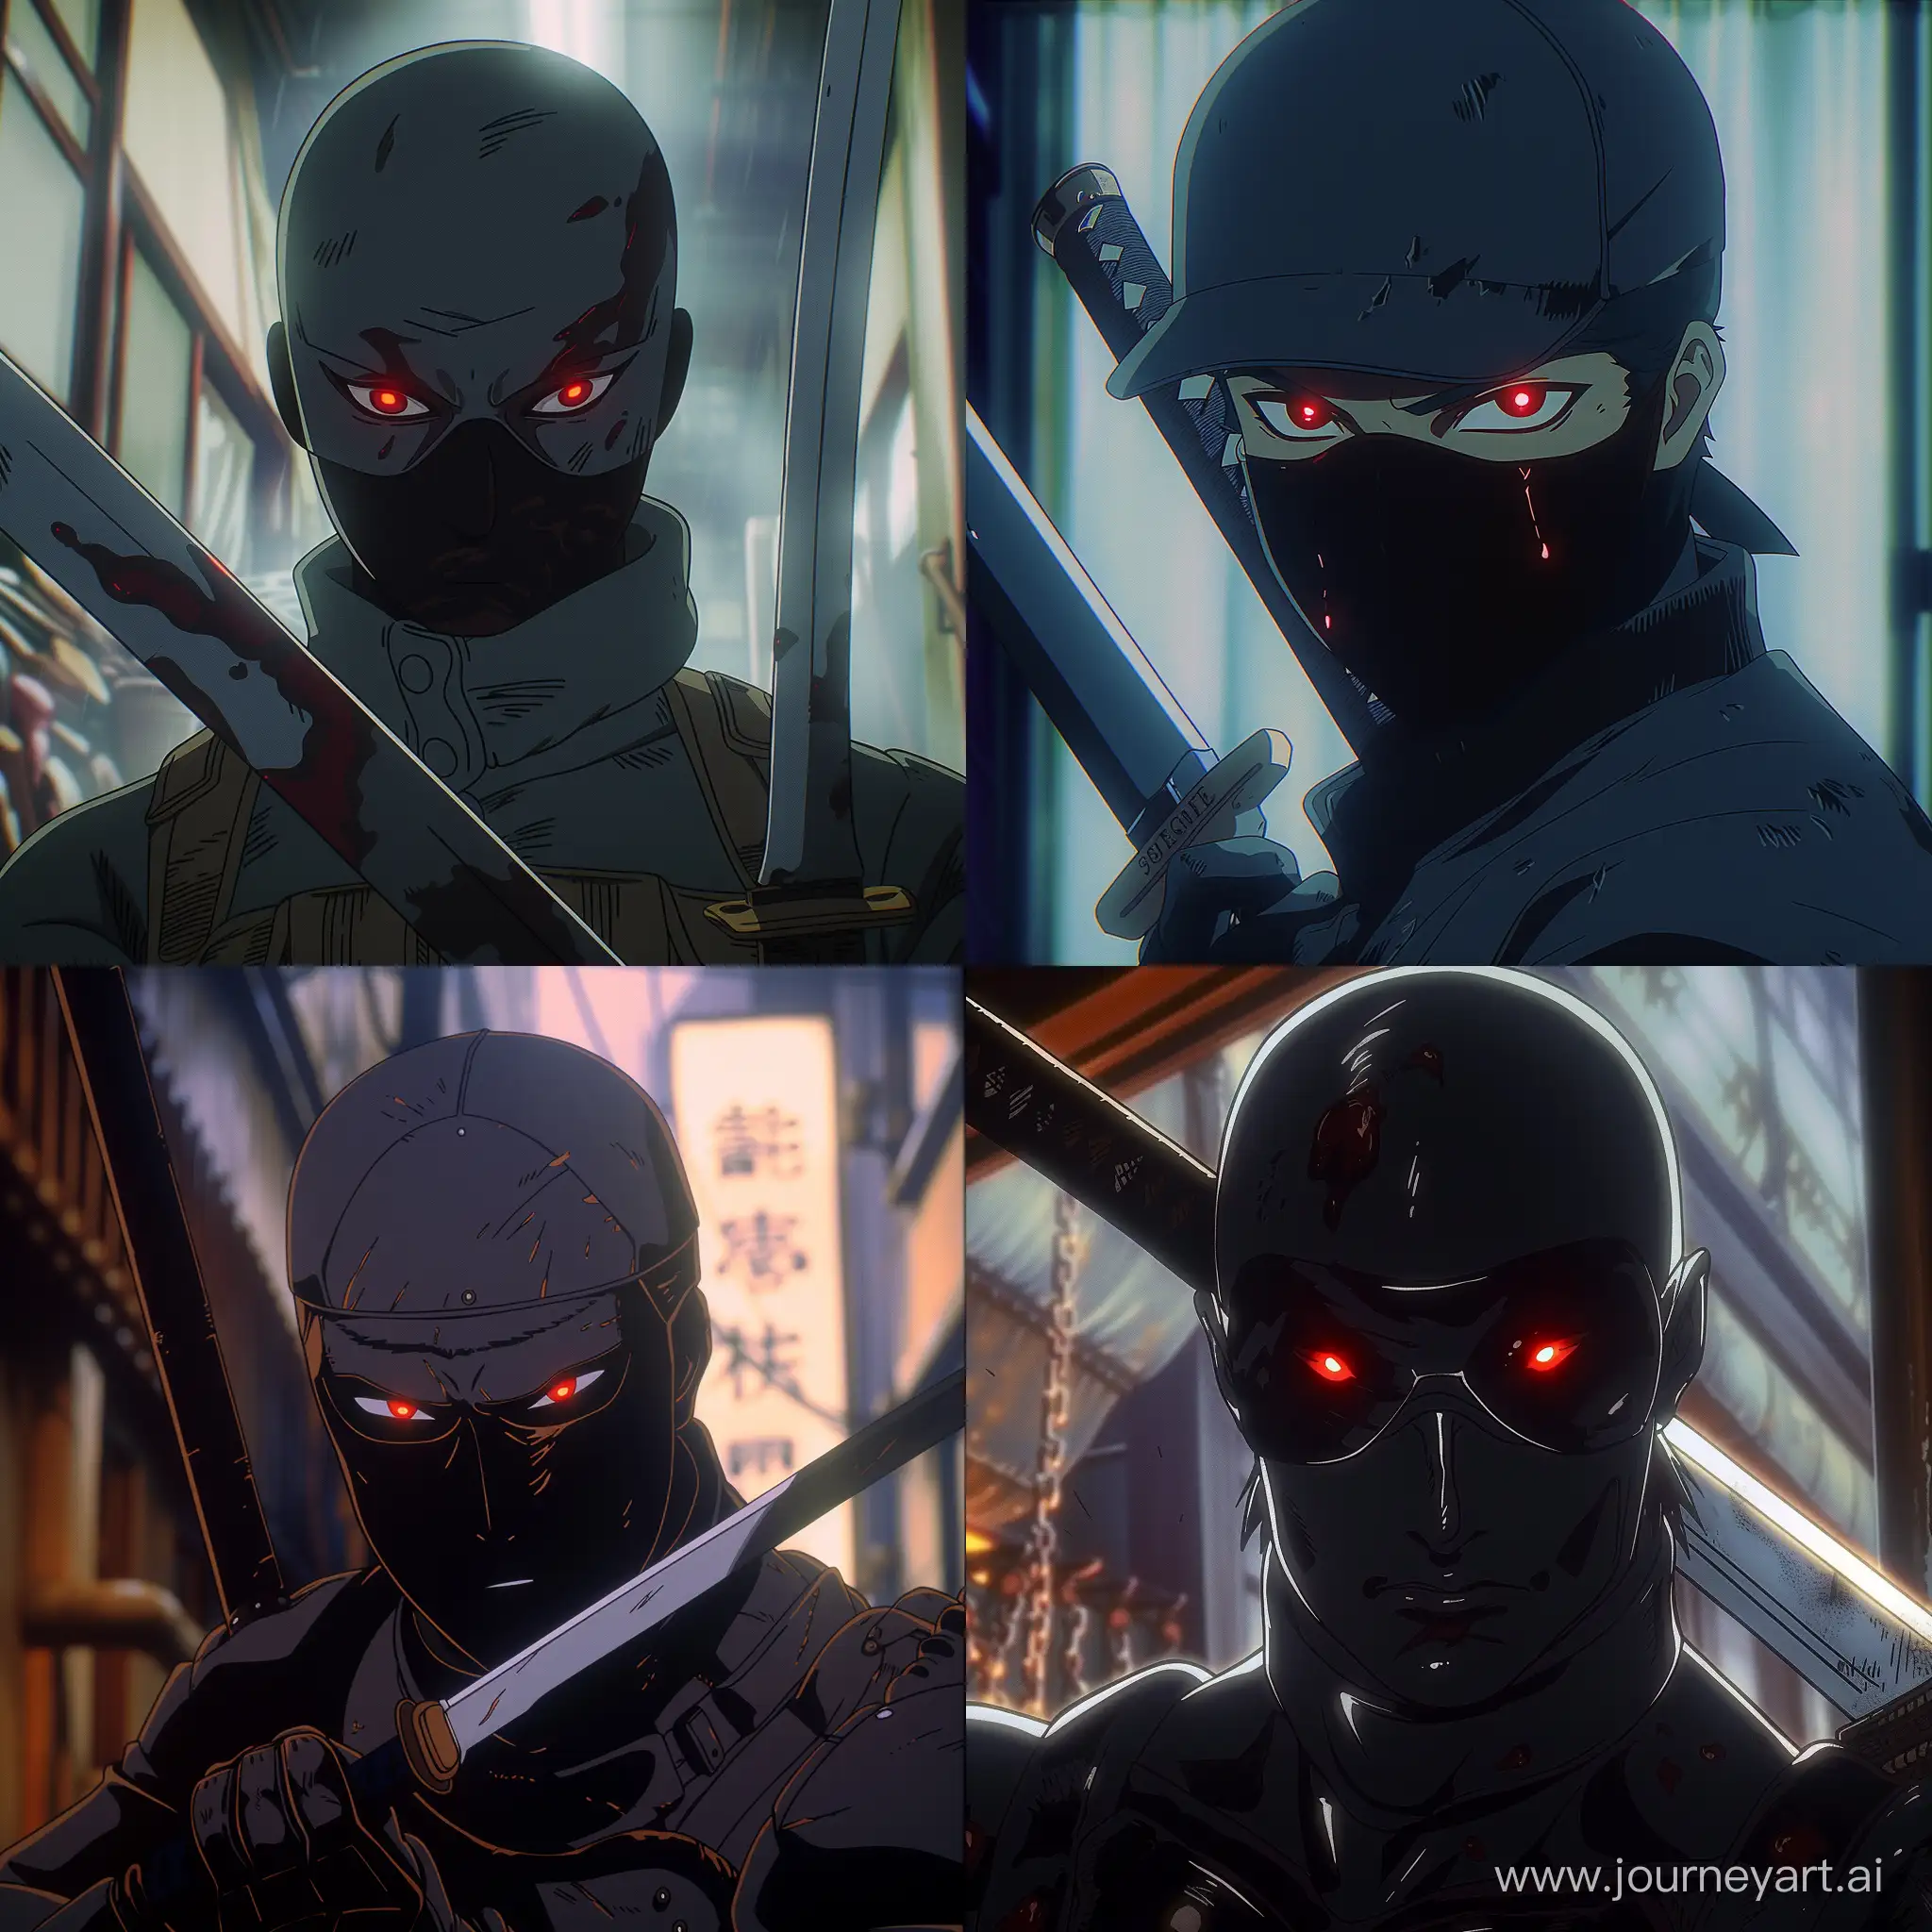 Retro-Anime-Bounty-Hunter-with-Glowing-Eyes-and-Blade-in-4K-Environment